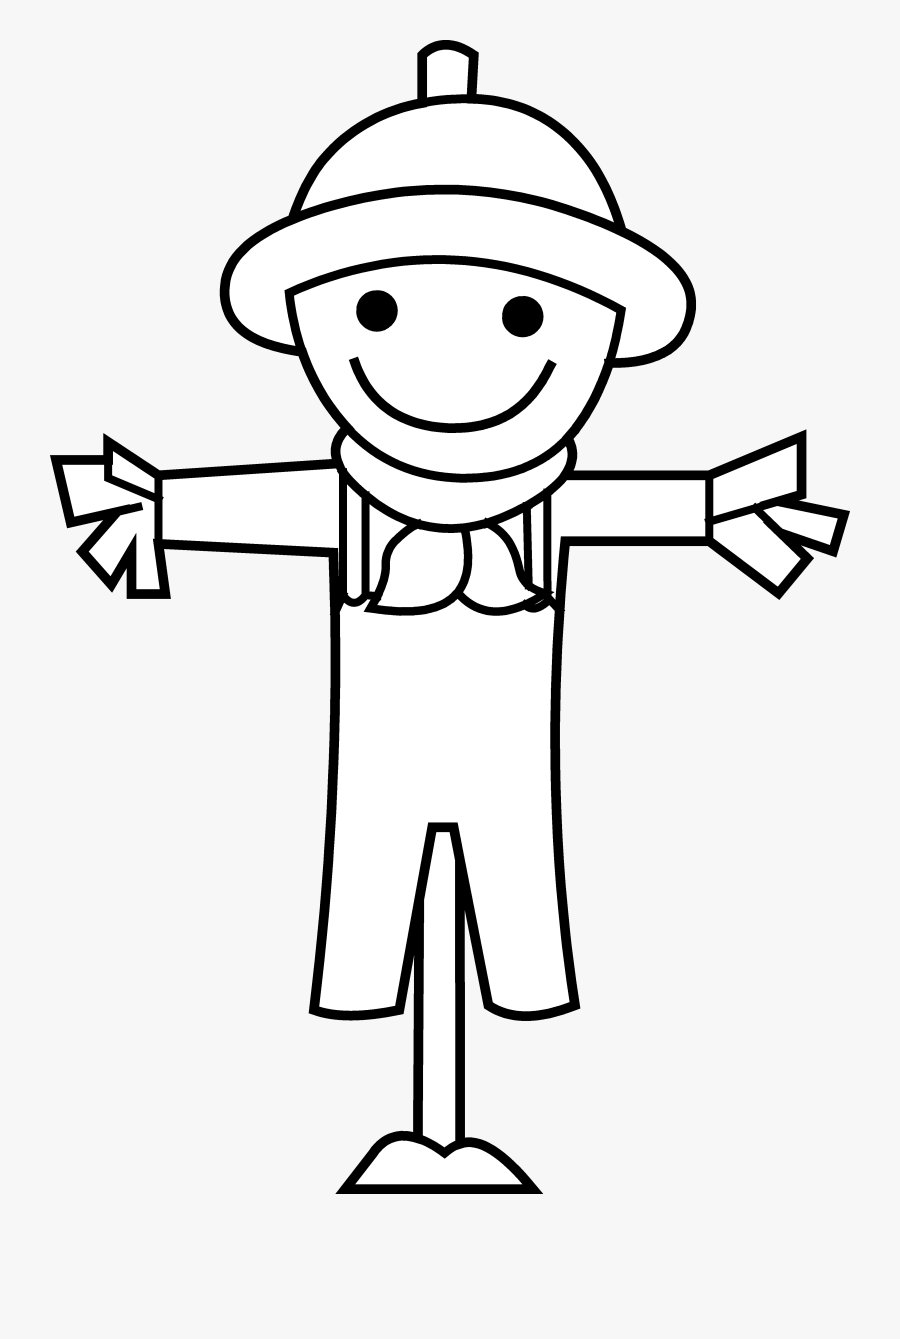 Harvest Clipart Black And White - Scarecrow Black And White, Transparent Clipart